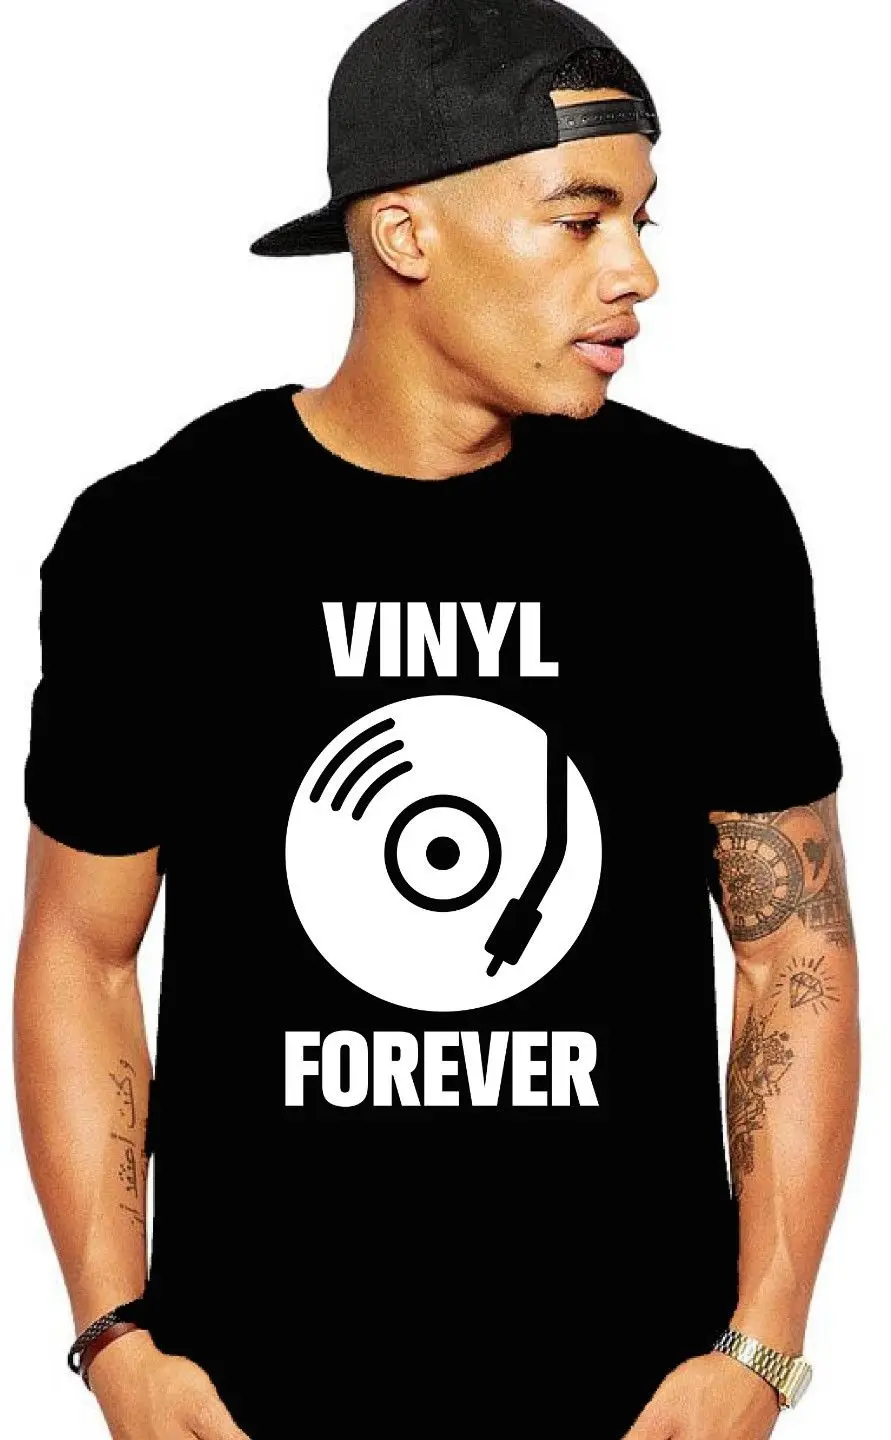 Vinyl forever to go by car